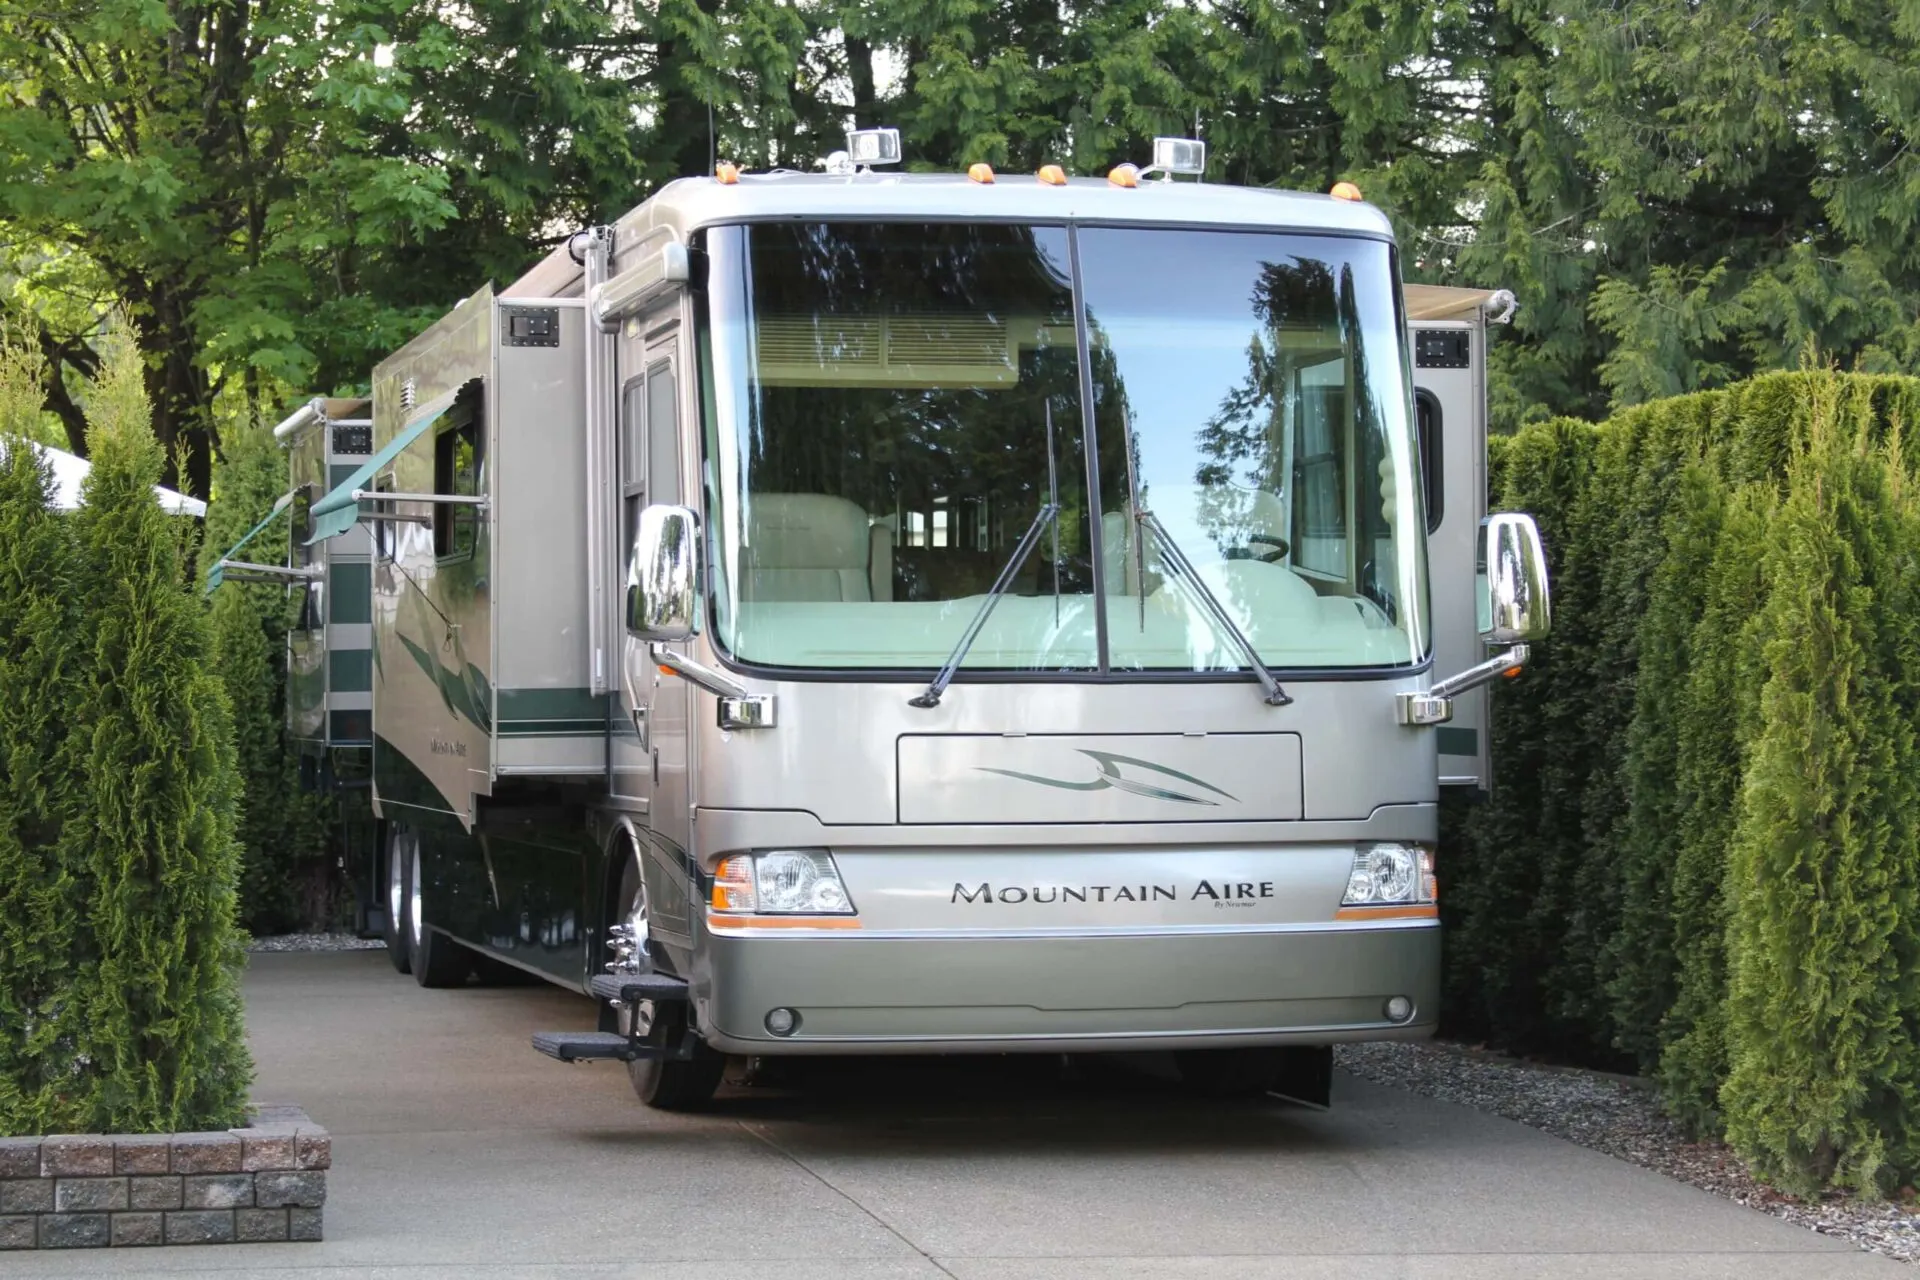 Full-time RV living includes more expenses than just site fees for RV parks and campgrounds